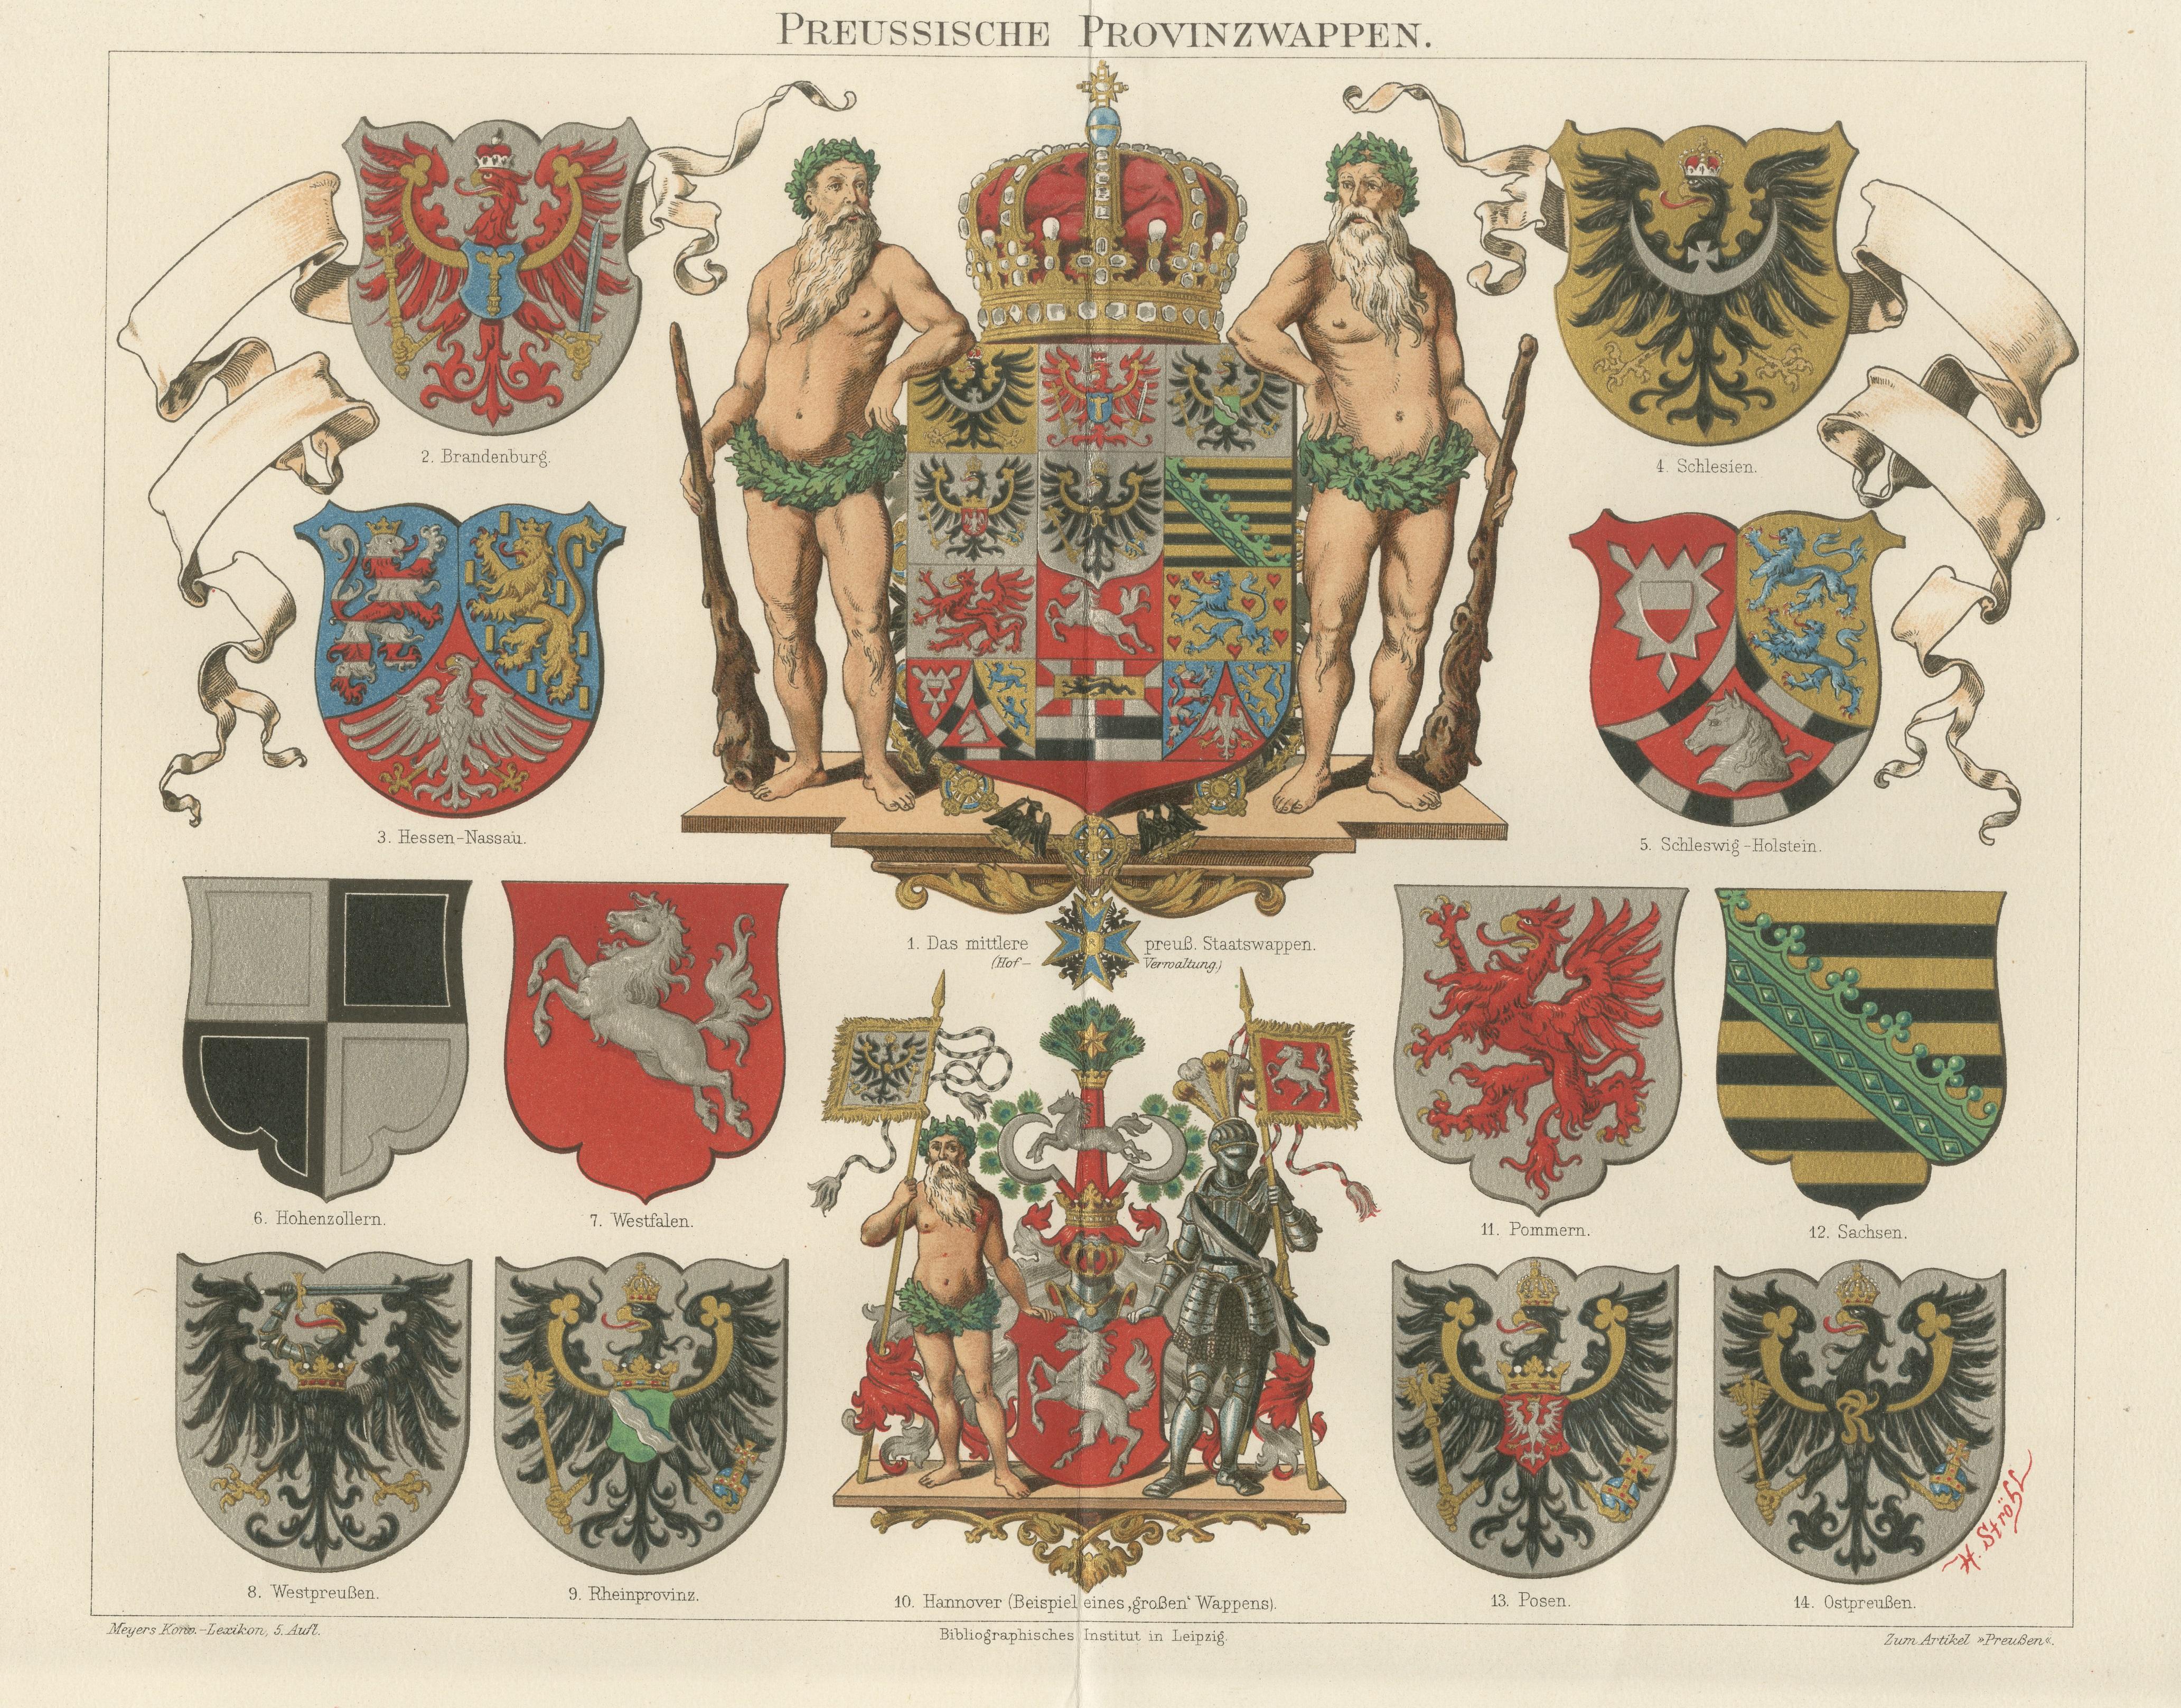 coat of arms of prussia